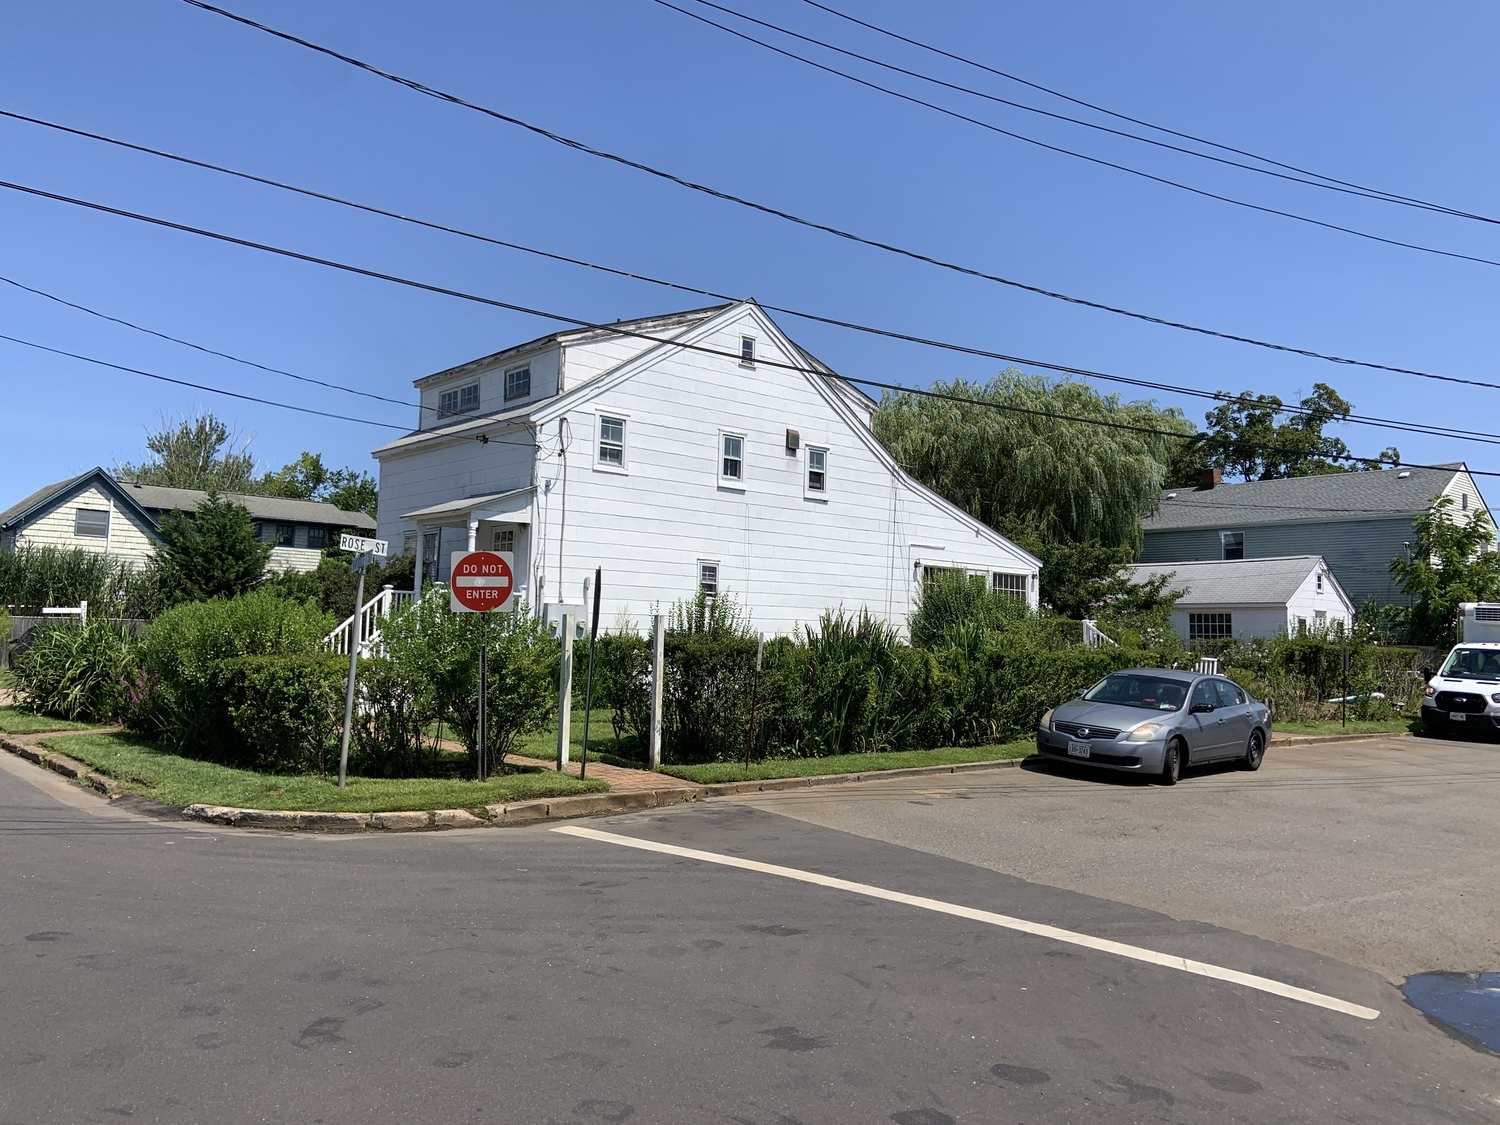 The developer Adam Potter has put three of the five properties he owns in the parking lot area behind Sag Harbor's Main Street up for sale, casting doubt on the future of the once ambitious plans for a sprawling commercial and residential development.